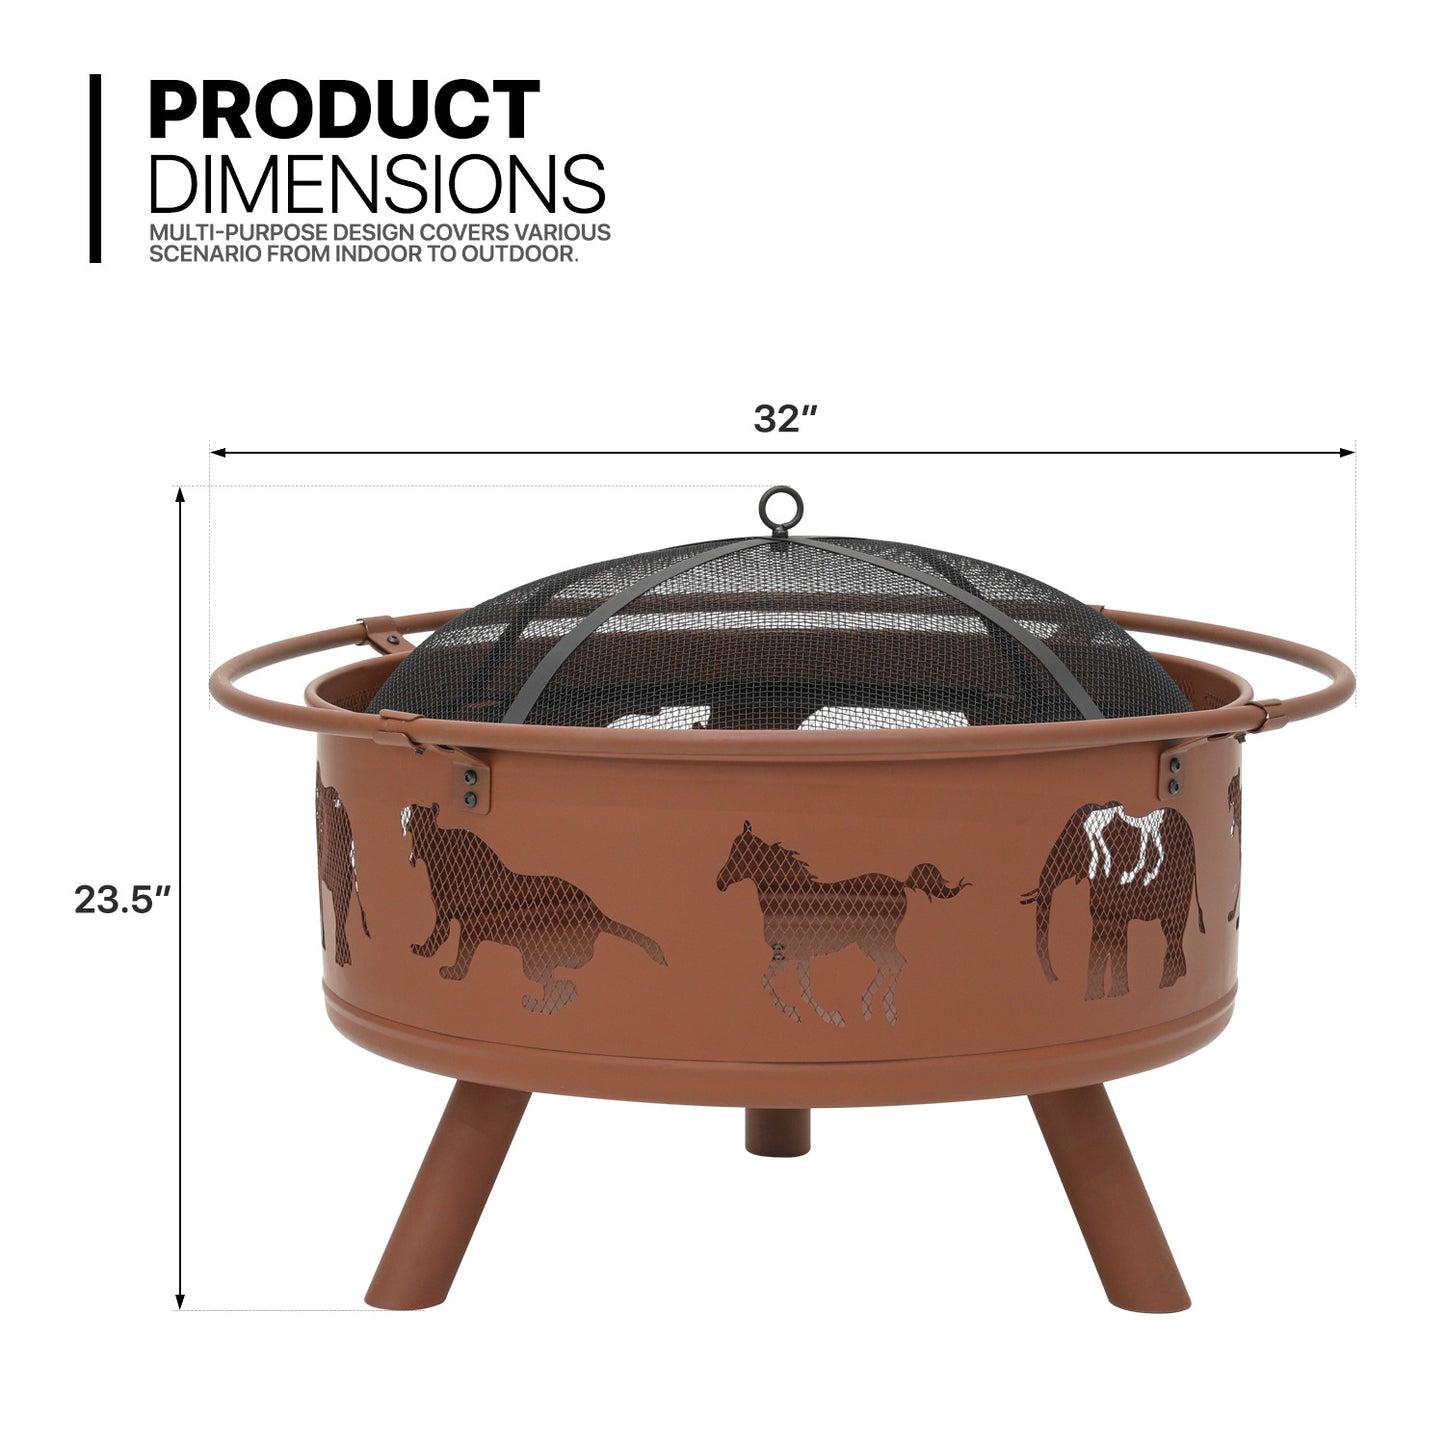 32" Horse Pattern Round Fire Pit w/Poker & Spark Screen